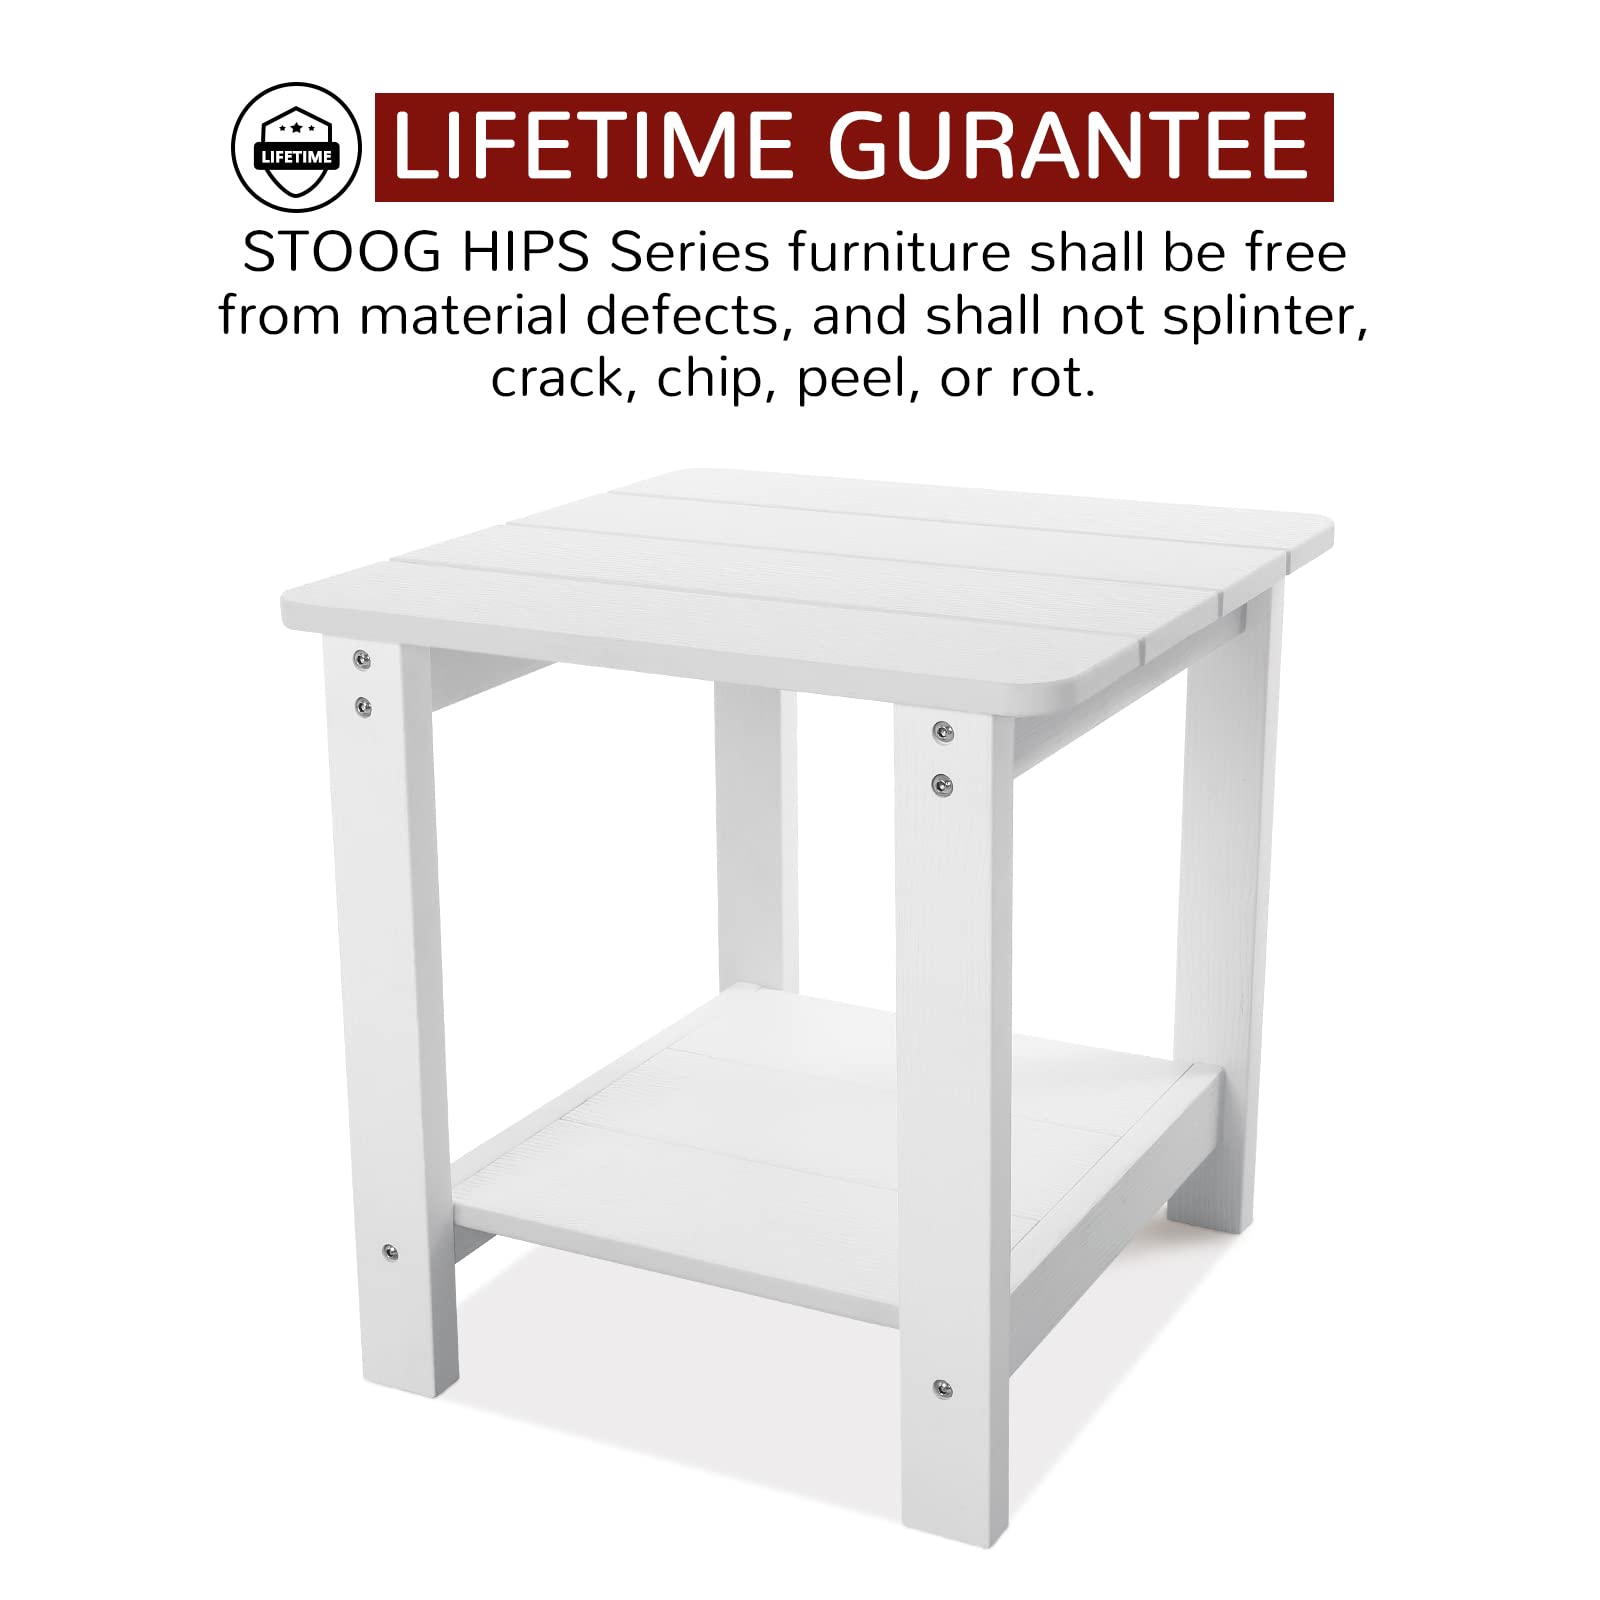 Outdoor Side Table, Weather Resistant 2-Tier Side Table, Hips Plastic End Table, Adirondack Side Table, Rocker Side Table for Backyard, Patio, Pool, Deck and Garden, White, 17 x 17x 17.5 inches - image 4 of 7